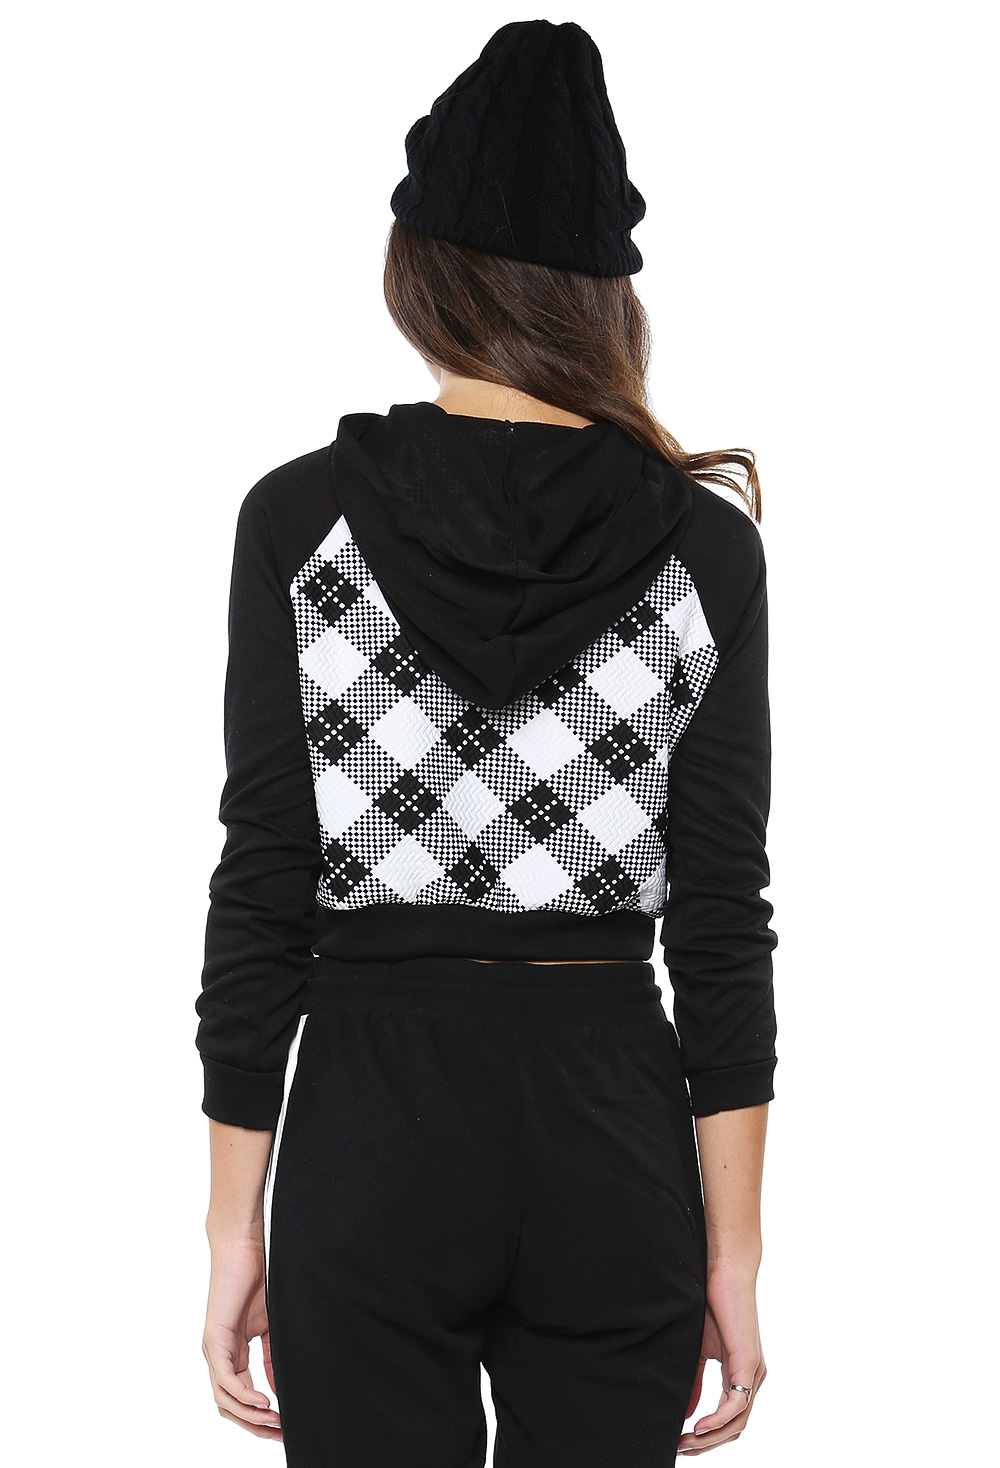 Black&White Checked Hoodie Crop Top | Shop What's New at Papaya Clothing